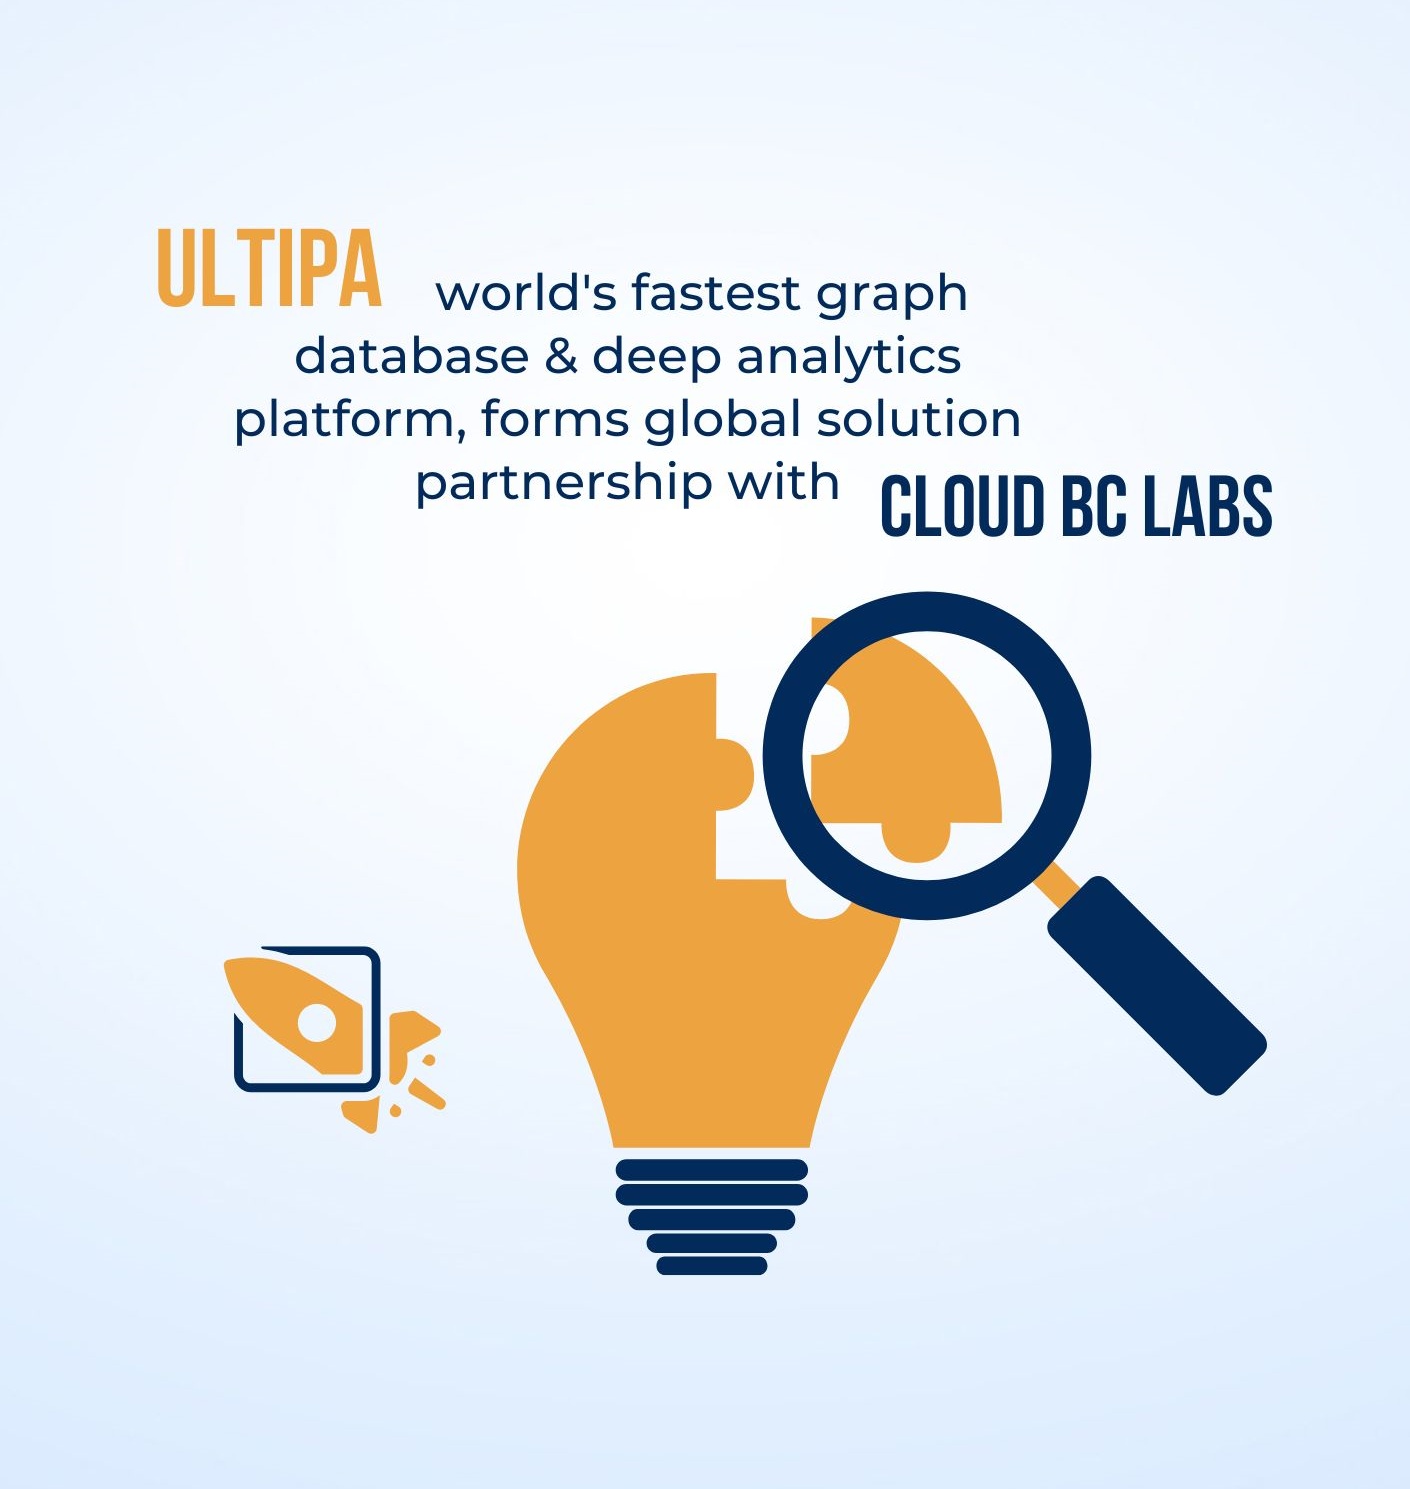 Ultipa Forms Global Solution Partnership with Cloud BC Labs - Ultipa Graph